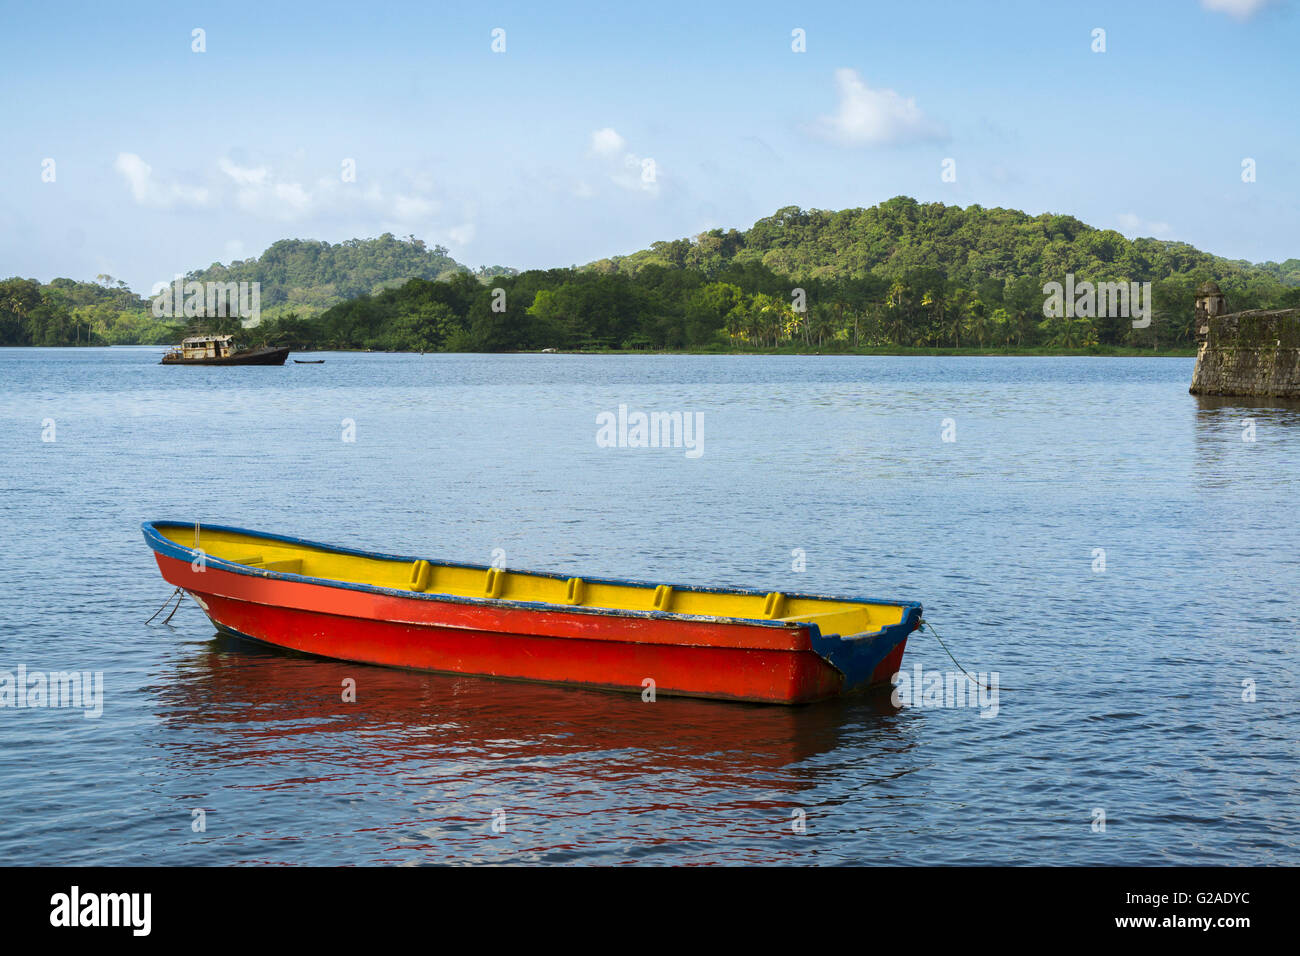 Boat on bay with green hills in background Stock Photo